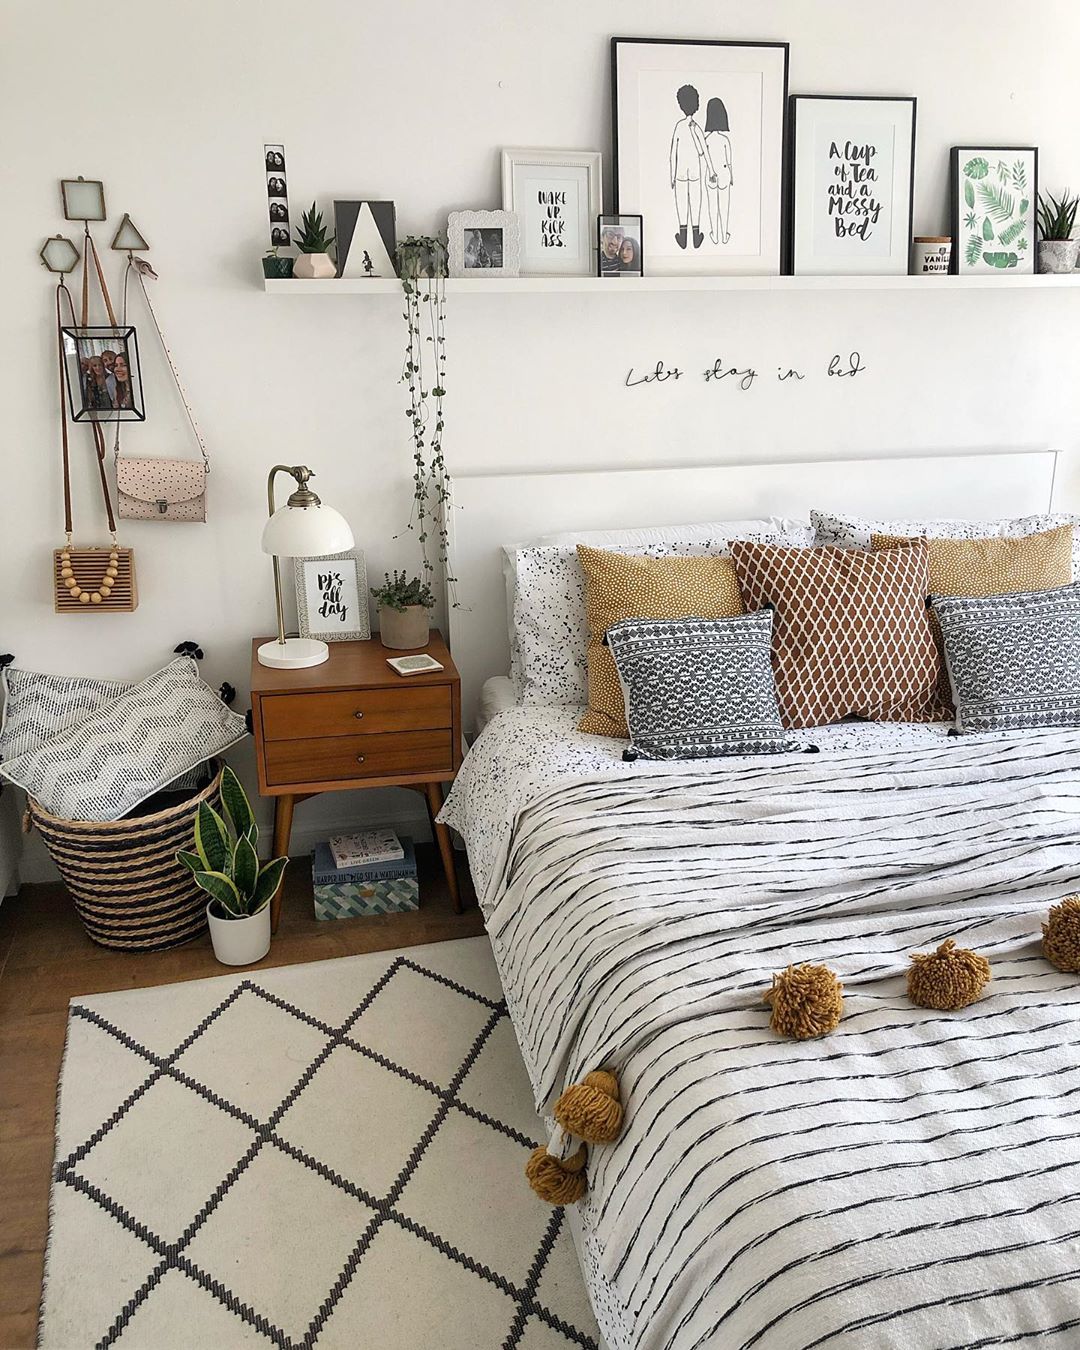 White bedroom with bed adorned in striped sheets and pictures on wall. Photo by Instagram user @nest_number_9